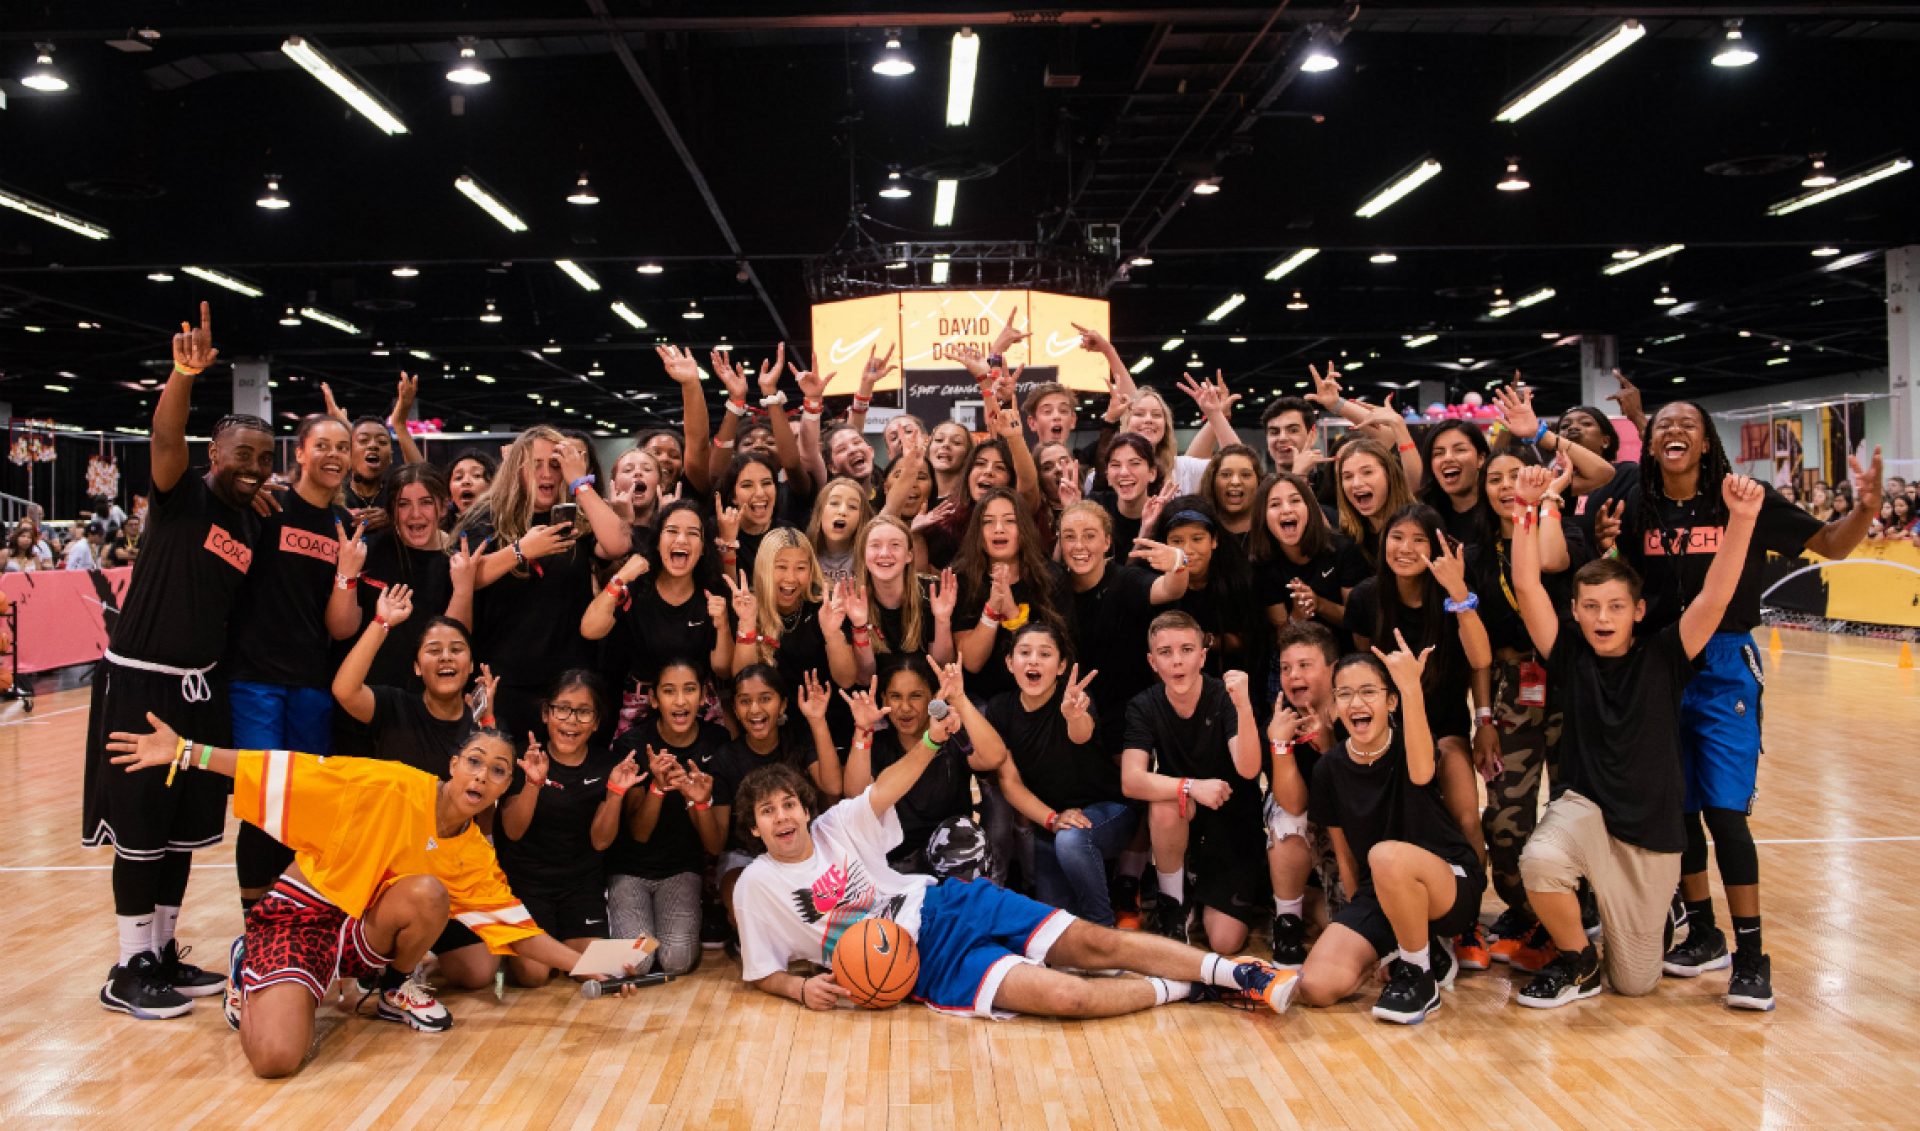 lid wanhoop mesh Nike And Collab Teamed Up To Let VidCon Attendees Get Their Game On With  David Dobrik, Liza Koshy, And More - Tubefilter